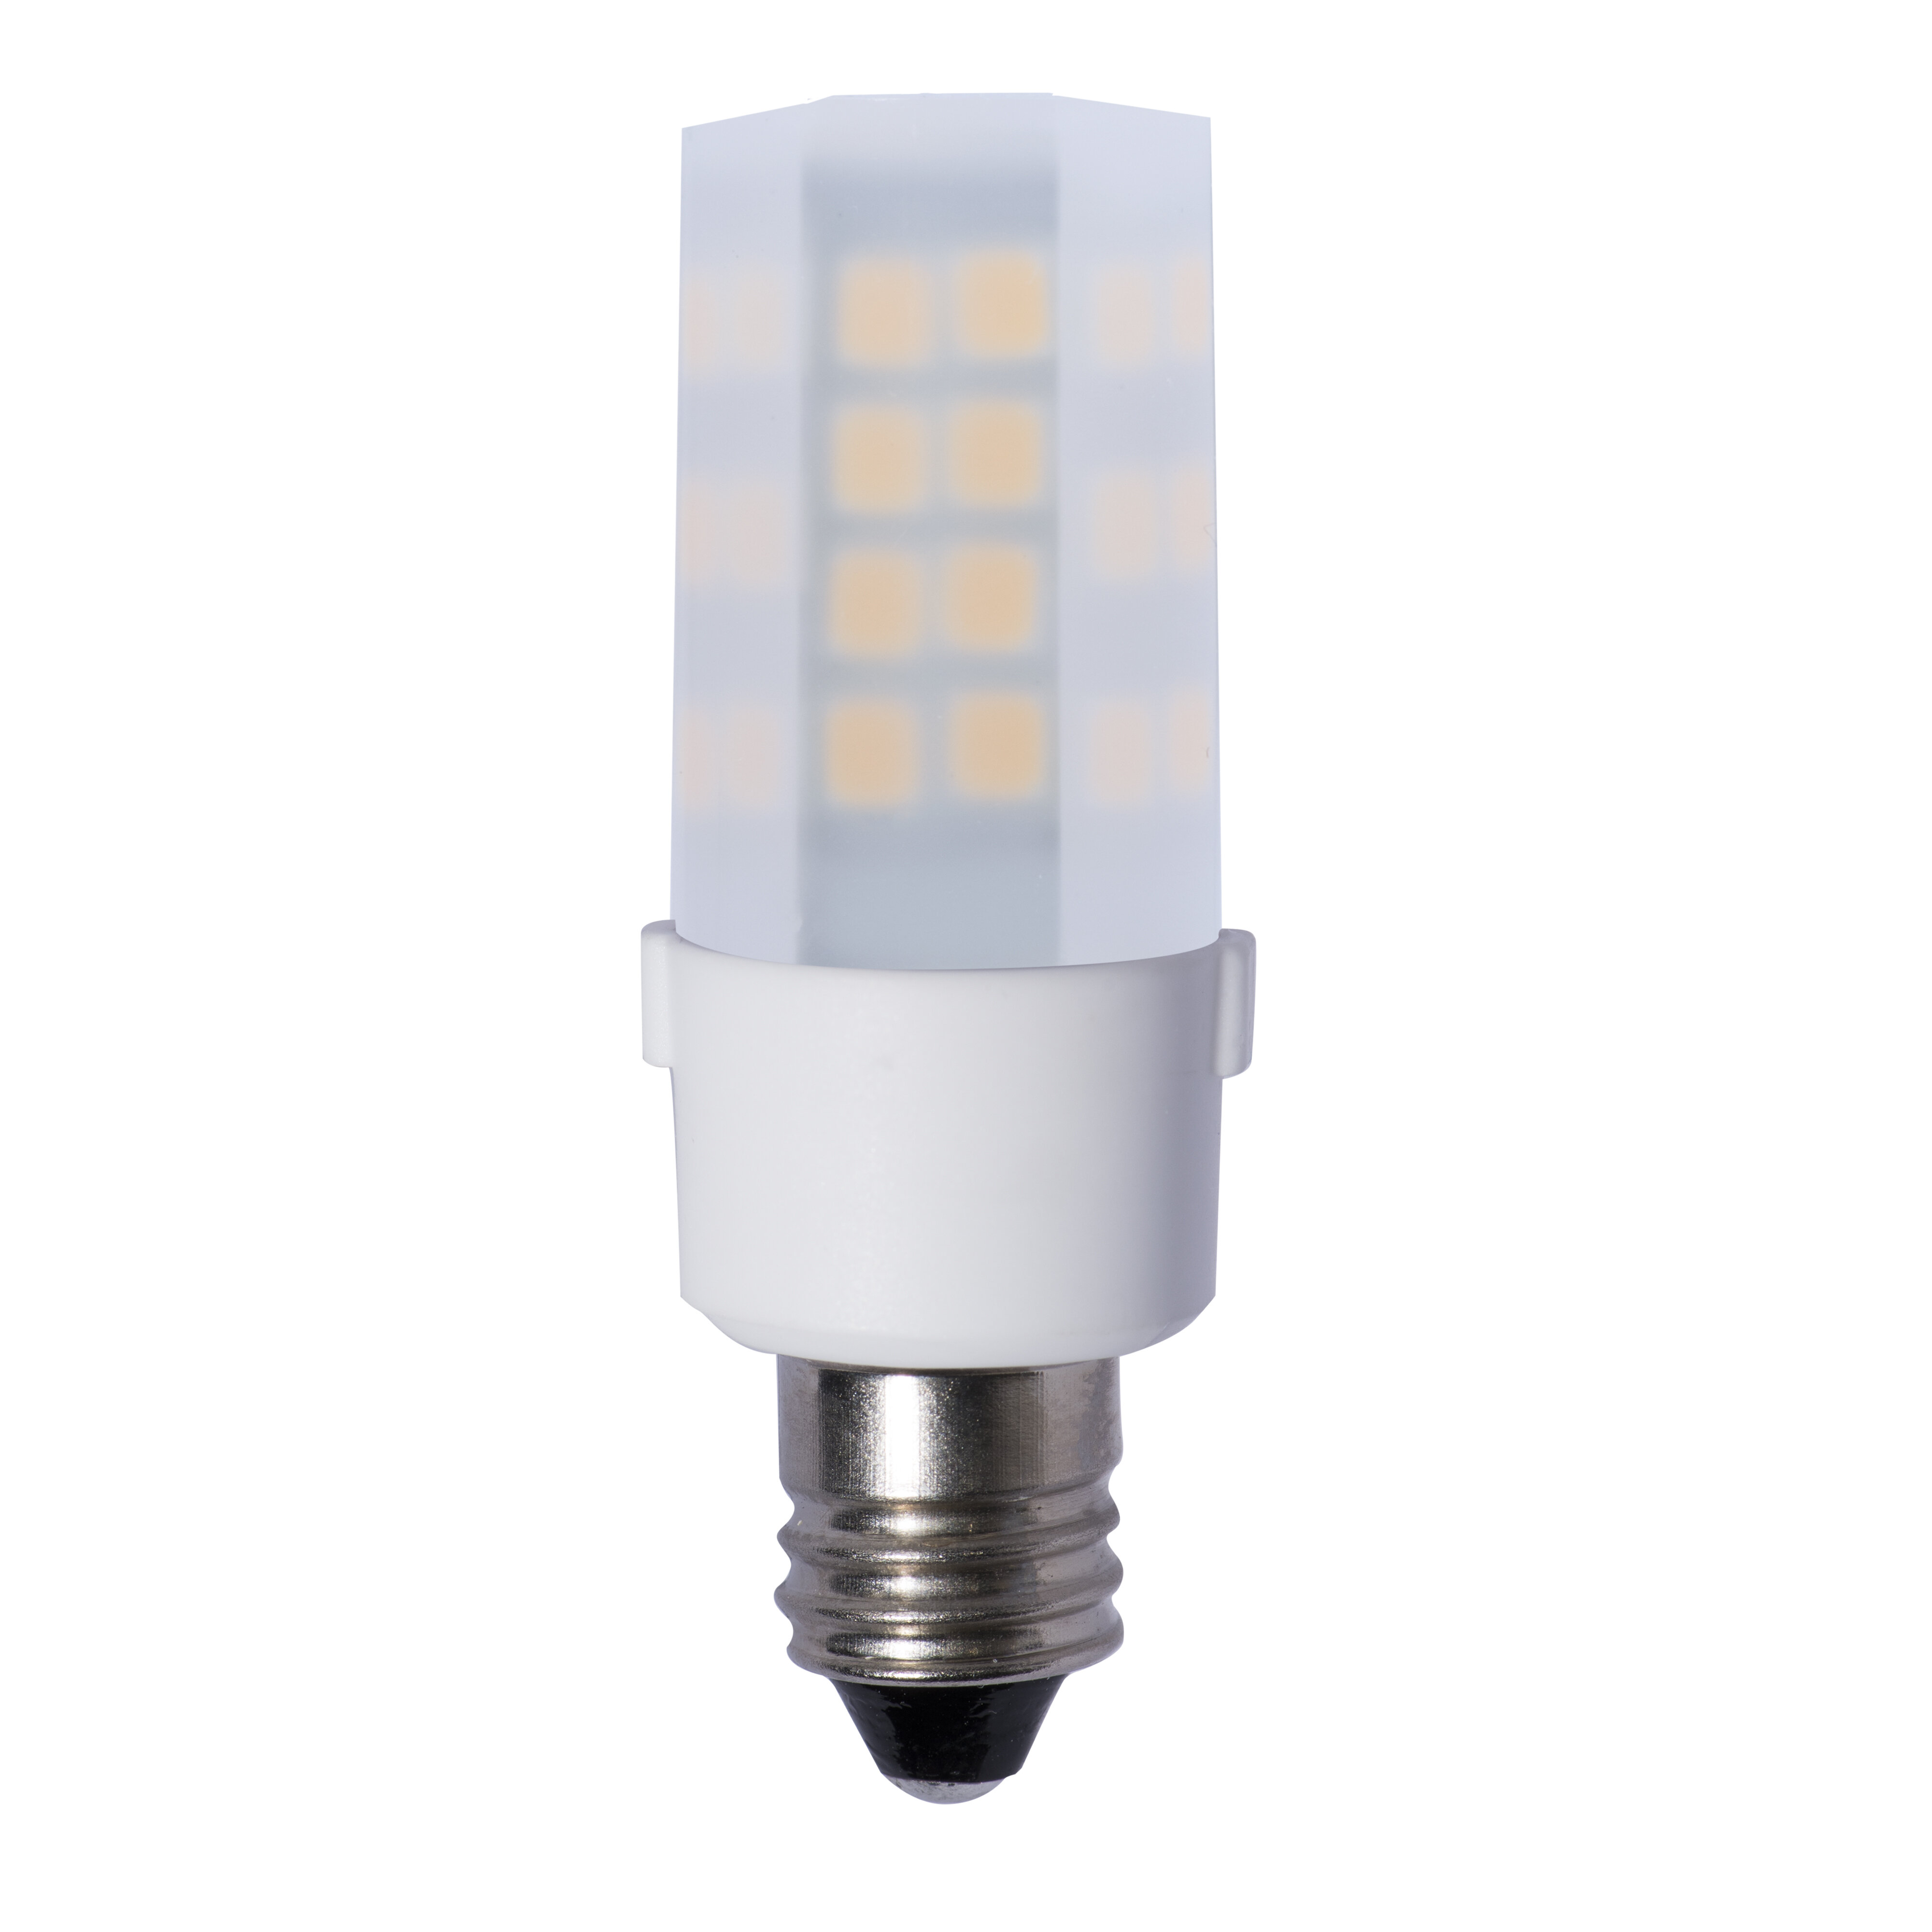 Bulbrite Industries 5W Dimmable LED Light Bulb